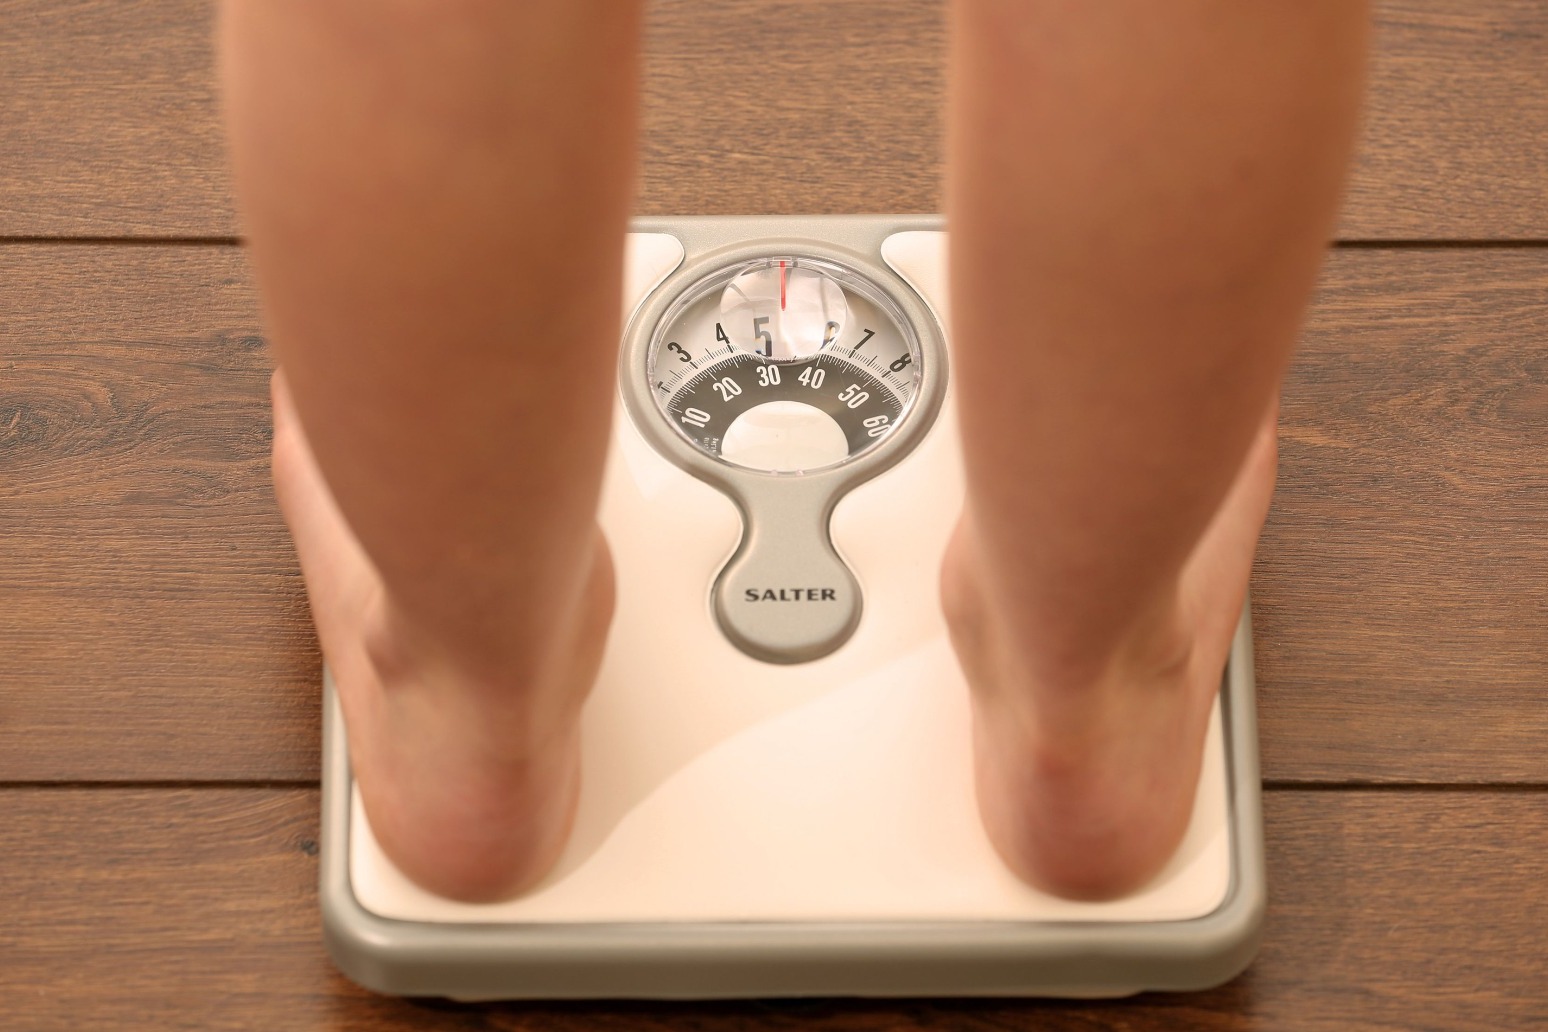 Children with obesity have higher MS risk 